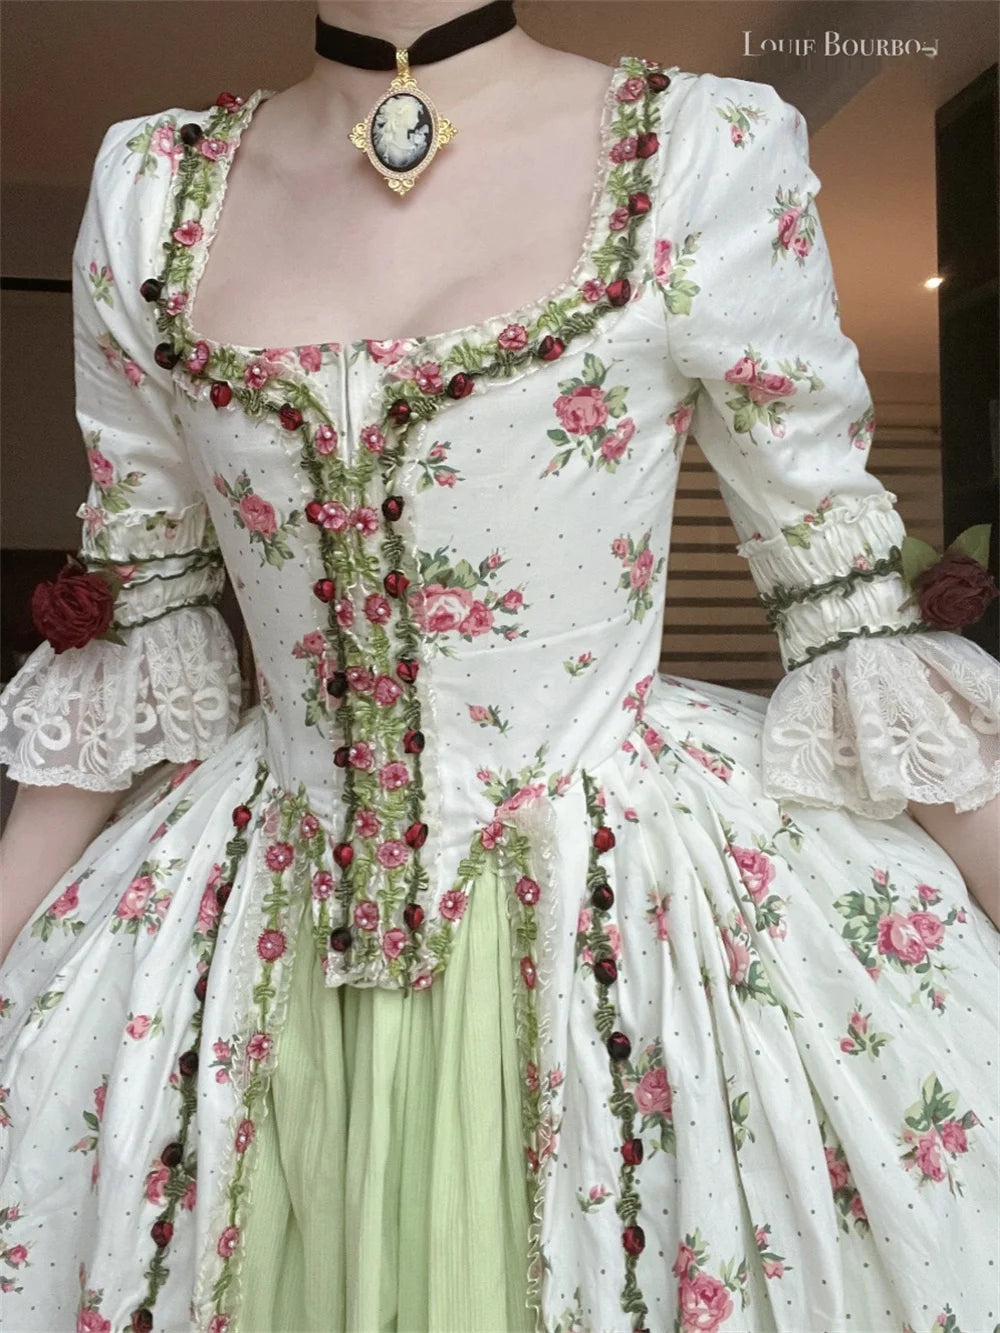 Robe A La Francaise 18th Century Robe De Bal Rococo Marie Antoinette Ball Gown Medieval Romantic French Court Dress for Women